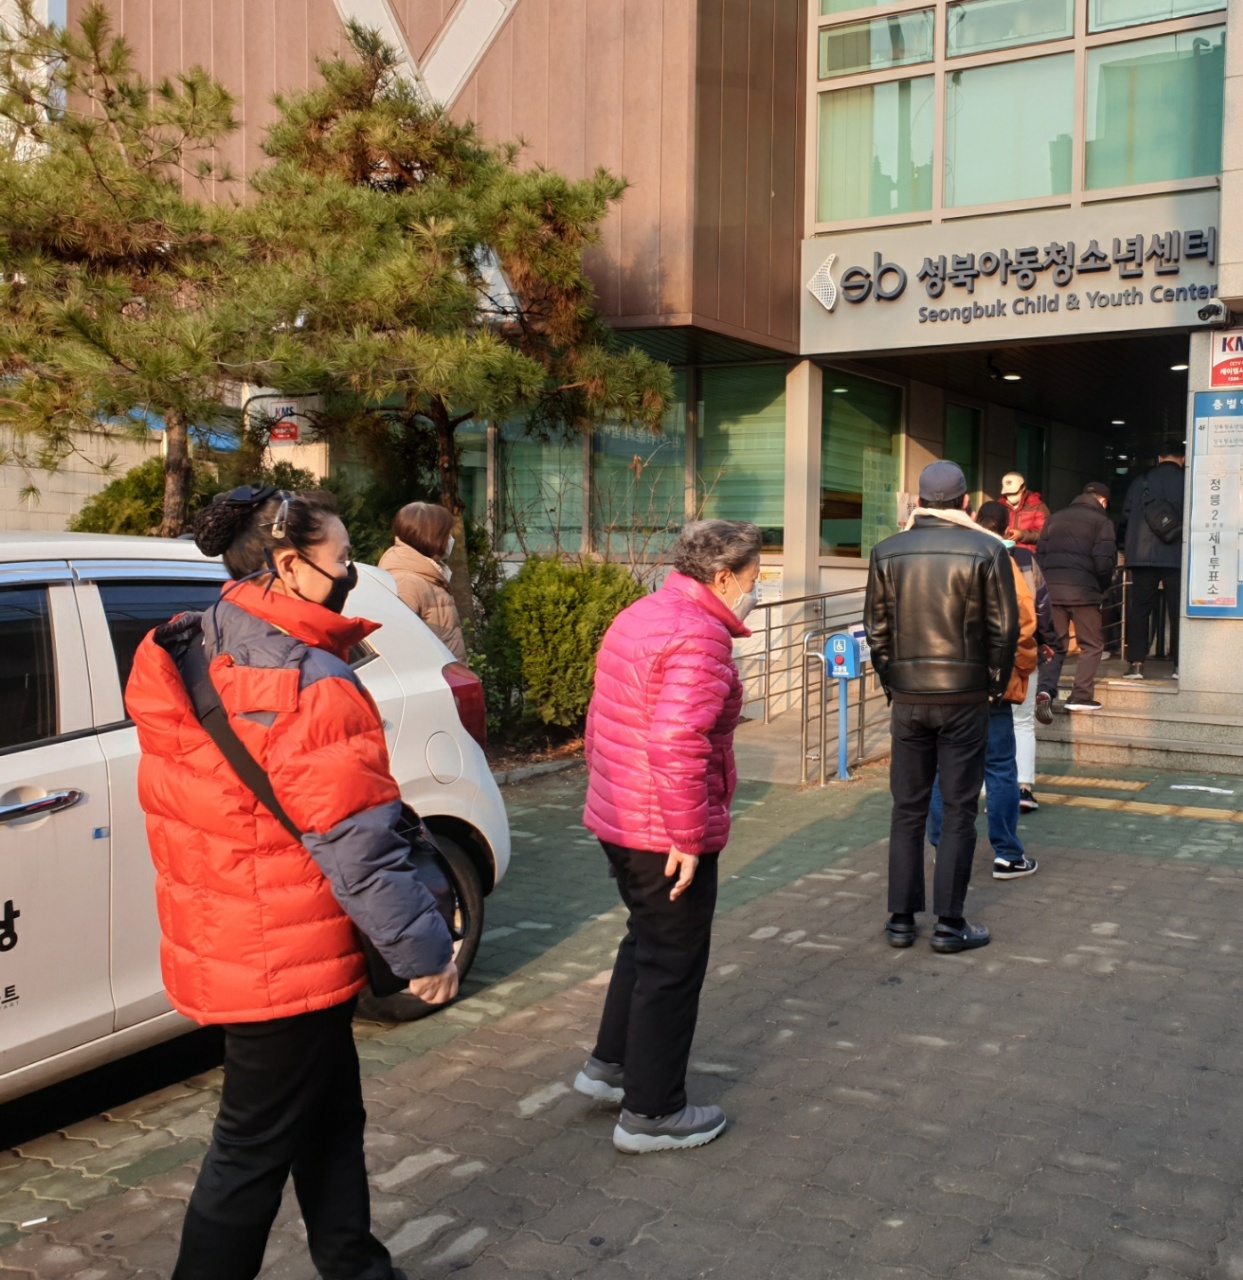 More than 20 people wait in line to cast their ballots at a polling station in Seongbuk Child and Youth Center, northern Seoul, on Wednesday at around 7:00 a.m. (Choi Jae-hee / The Korea Herald)